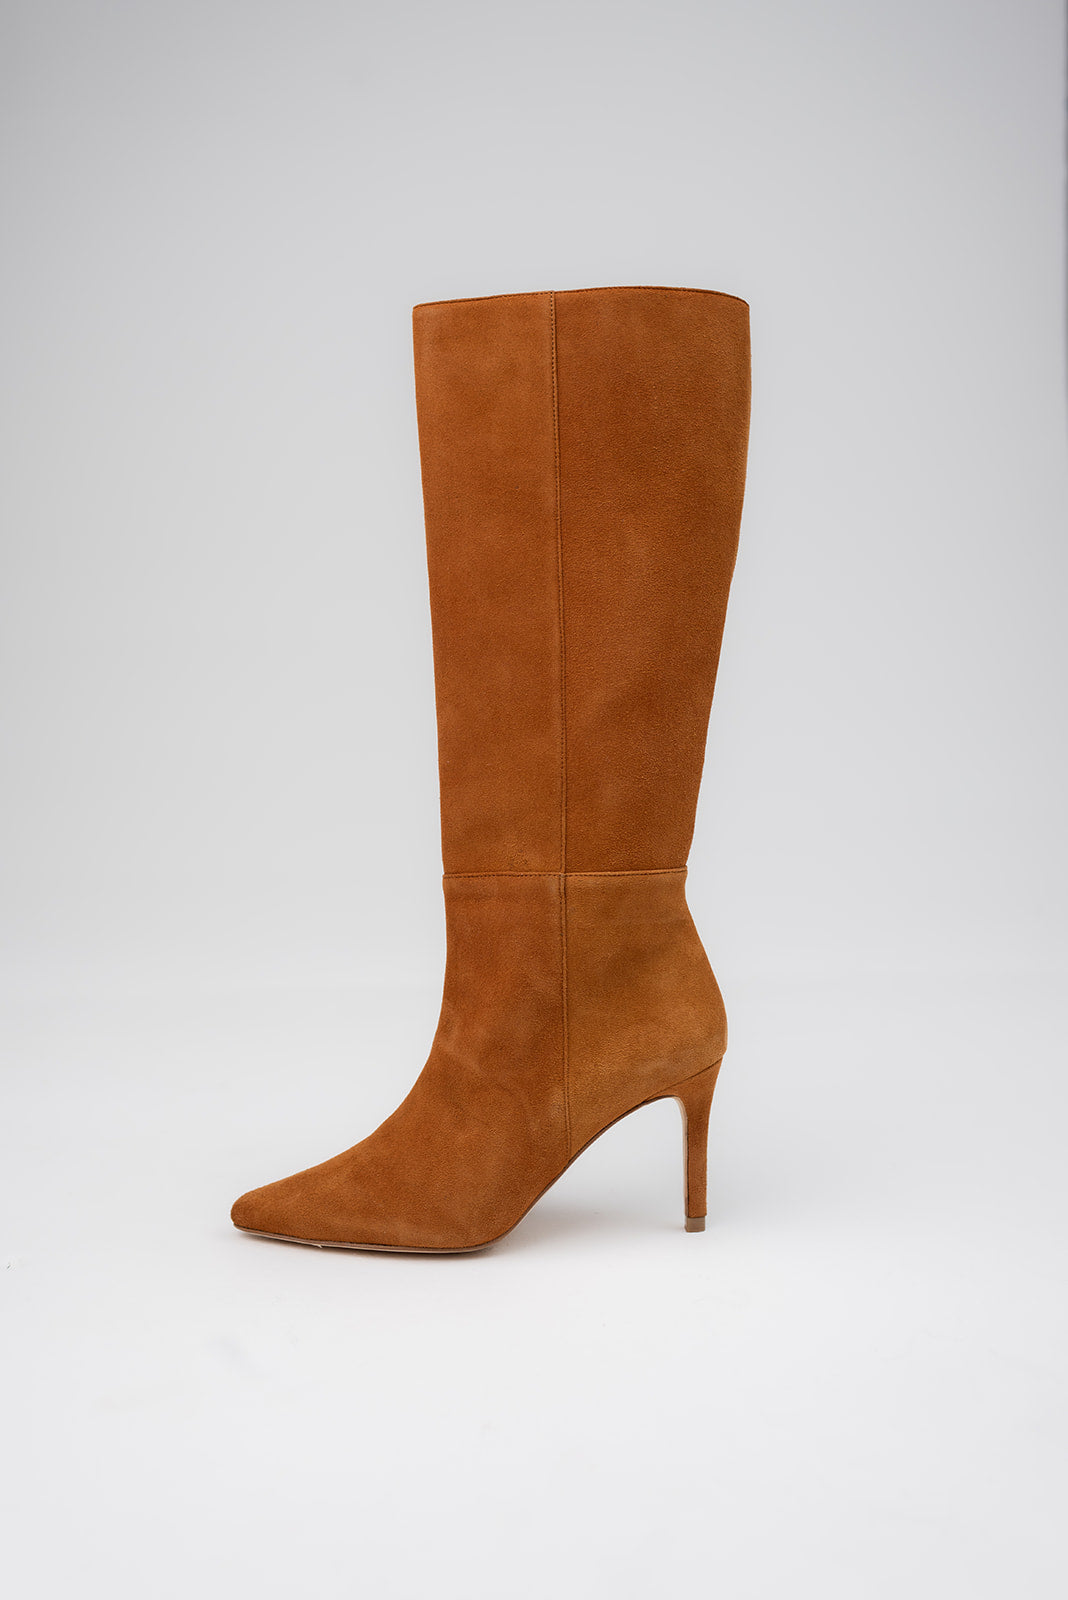 Celina TALL BOOT- SUEDE